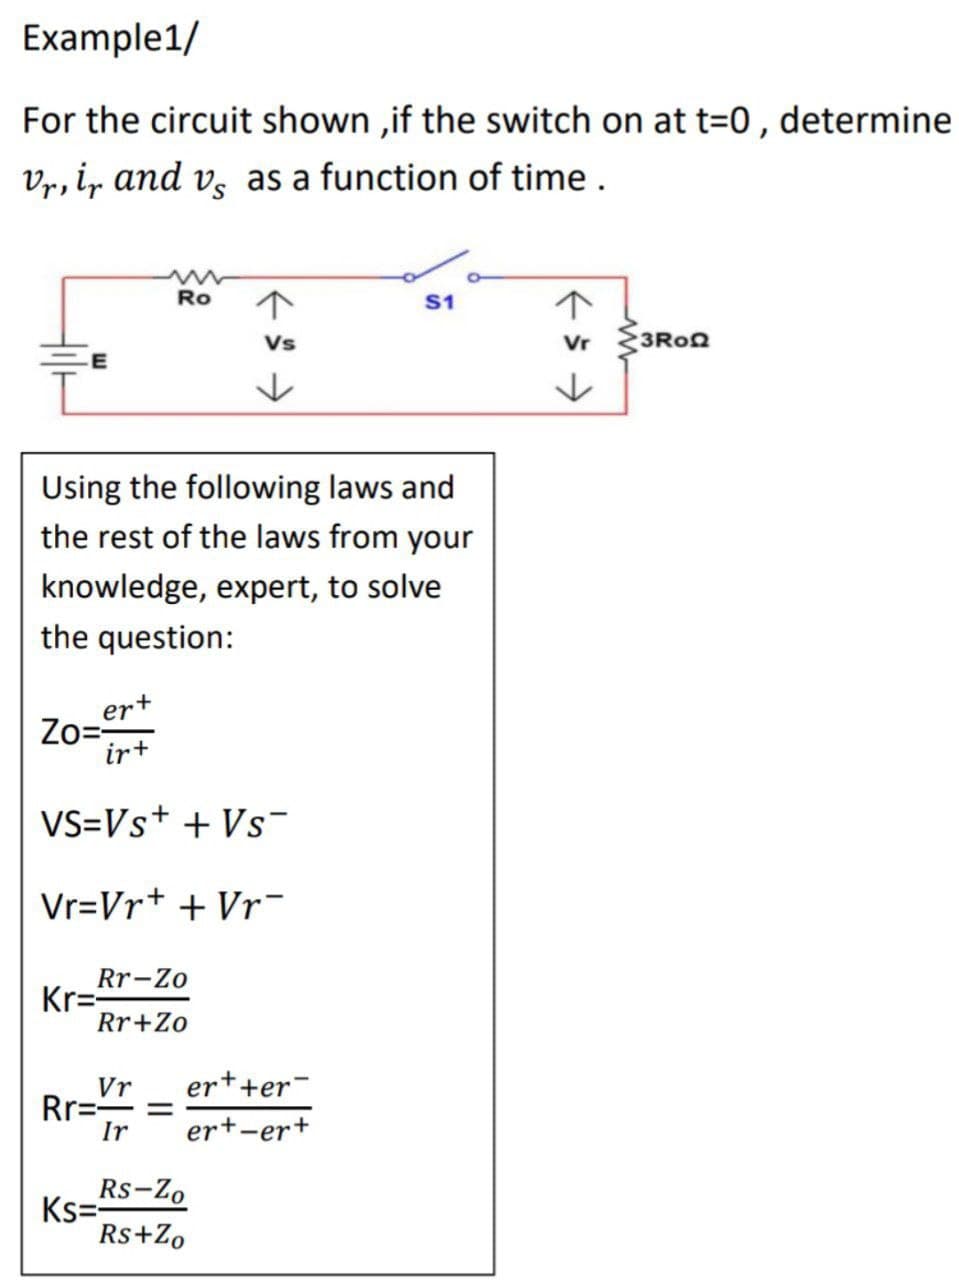 Example1/
For the circuit shown, if the switch on at t=0, determine
Vr, ir and vs as a function of time.
Ro
S1
Vs
Vr
3RoQ
↓
Using the following laws and
the rest of the laws from your
knowledge, expert, to solve
the question:
Zo=er
ir+
VS=Vs+ + Vs¯
Vr=Vr+ + Vr
Rr-Zo
Kr=
Rr+Zo
Vr
Rr===
Ks=Rs-Zo
Rs+Zo
er++er
Ir ert-er+